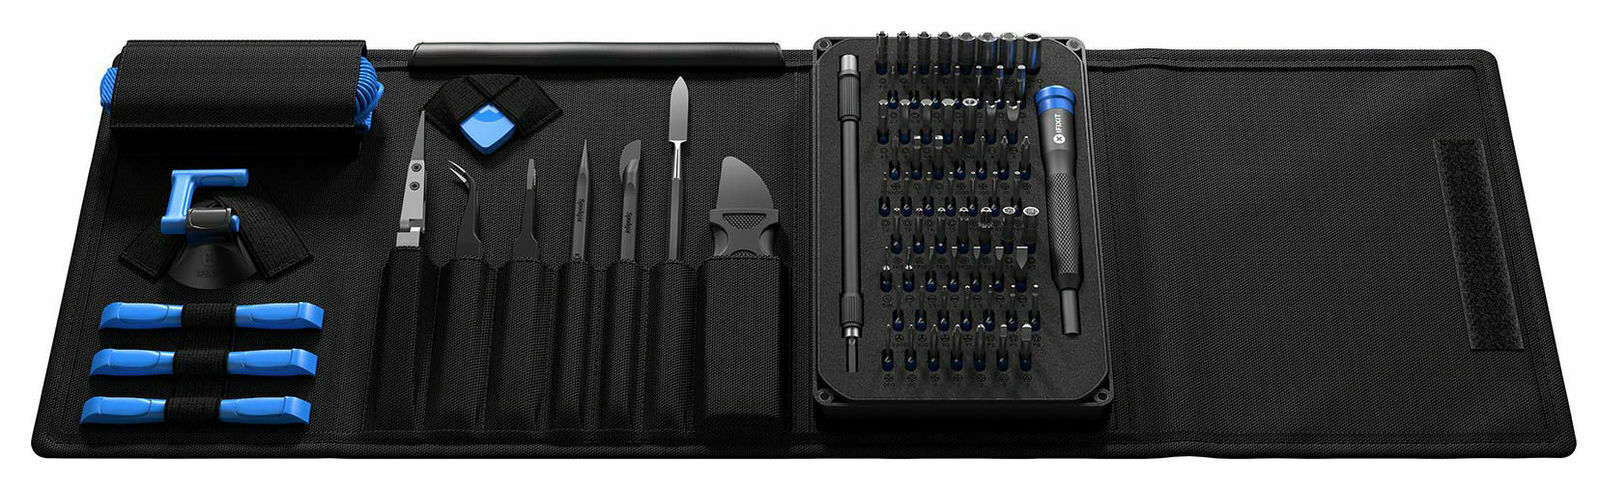 iFixit 87 Piece Electronics Smartphone Computer & Tablet Repair Kit IF145-307-4